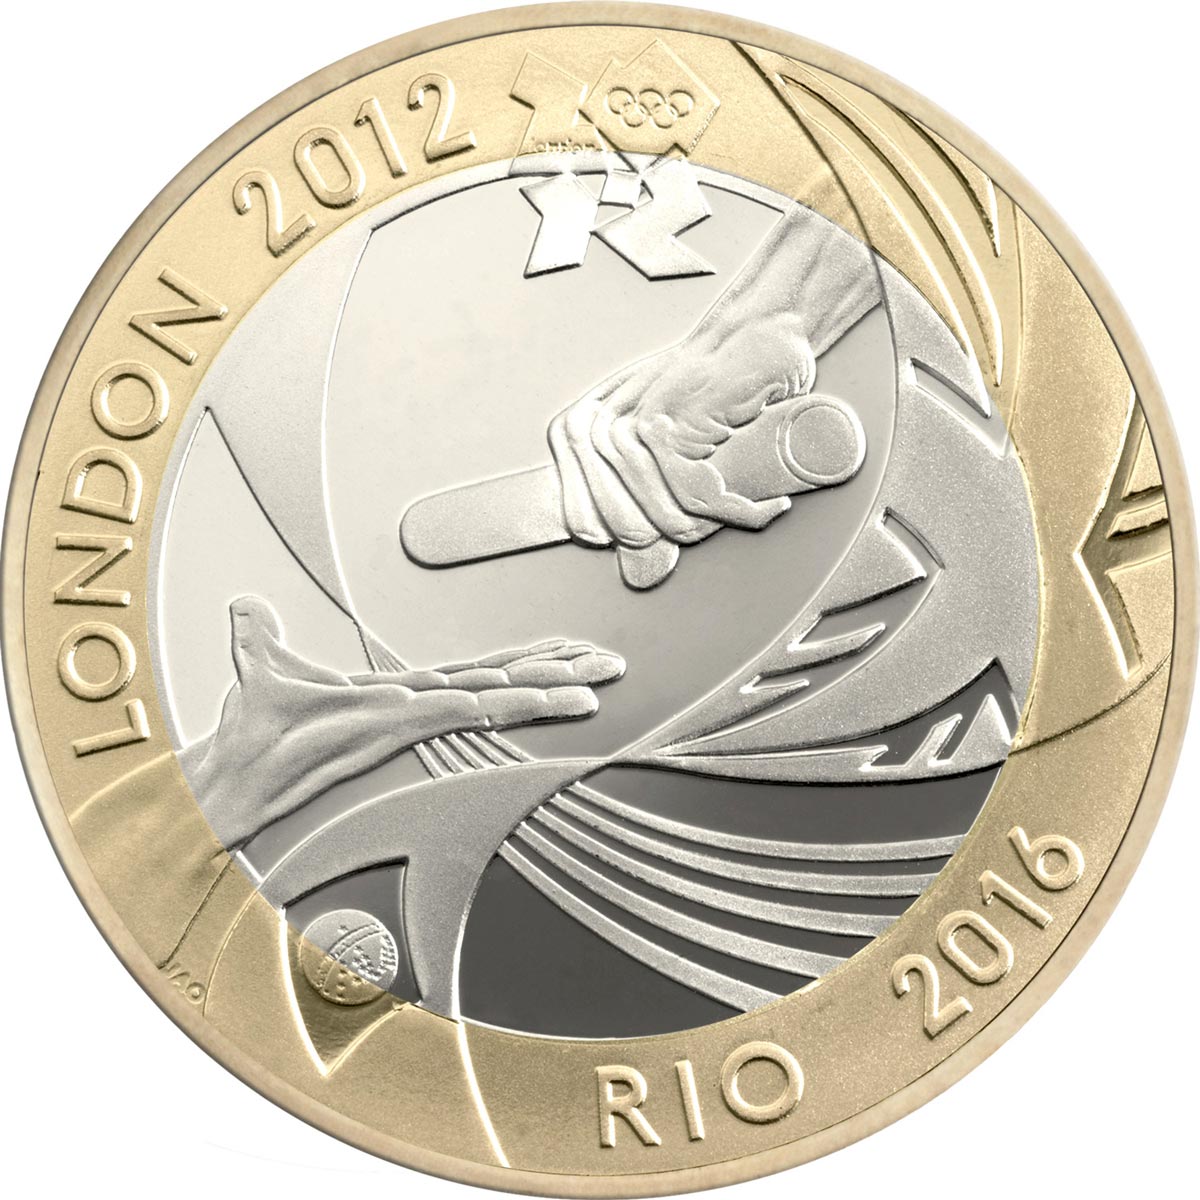 Image of 2 pounds coin - Handover to Rio | United Kingdom 2012.  The Bimetal: CuNi, nordic gold coin is of Proof, BU, UNC quality.